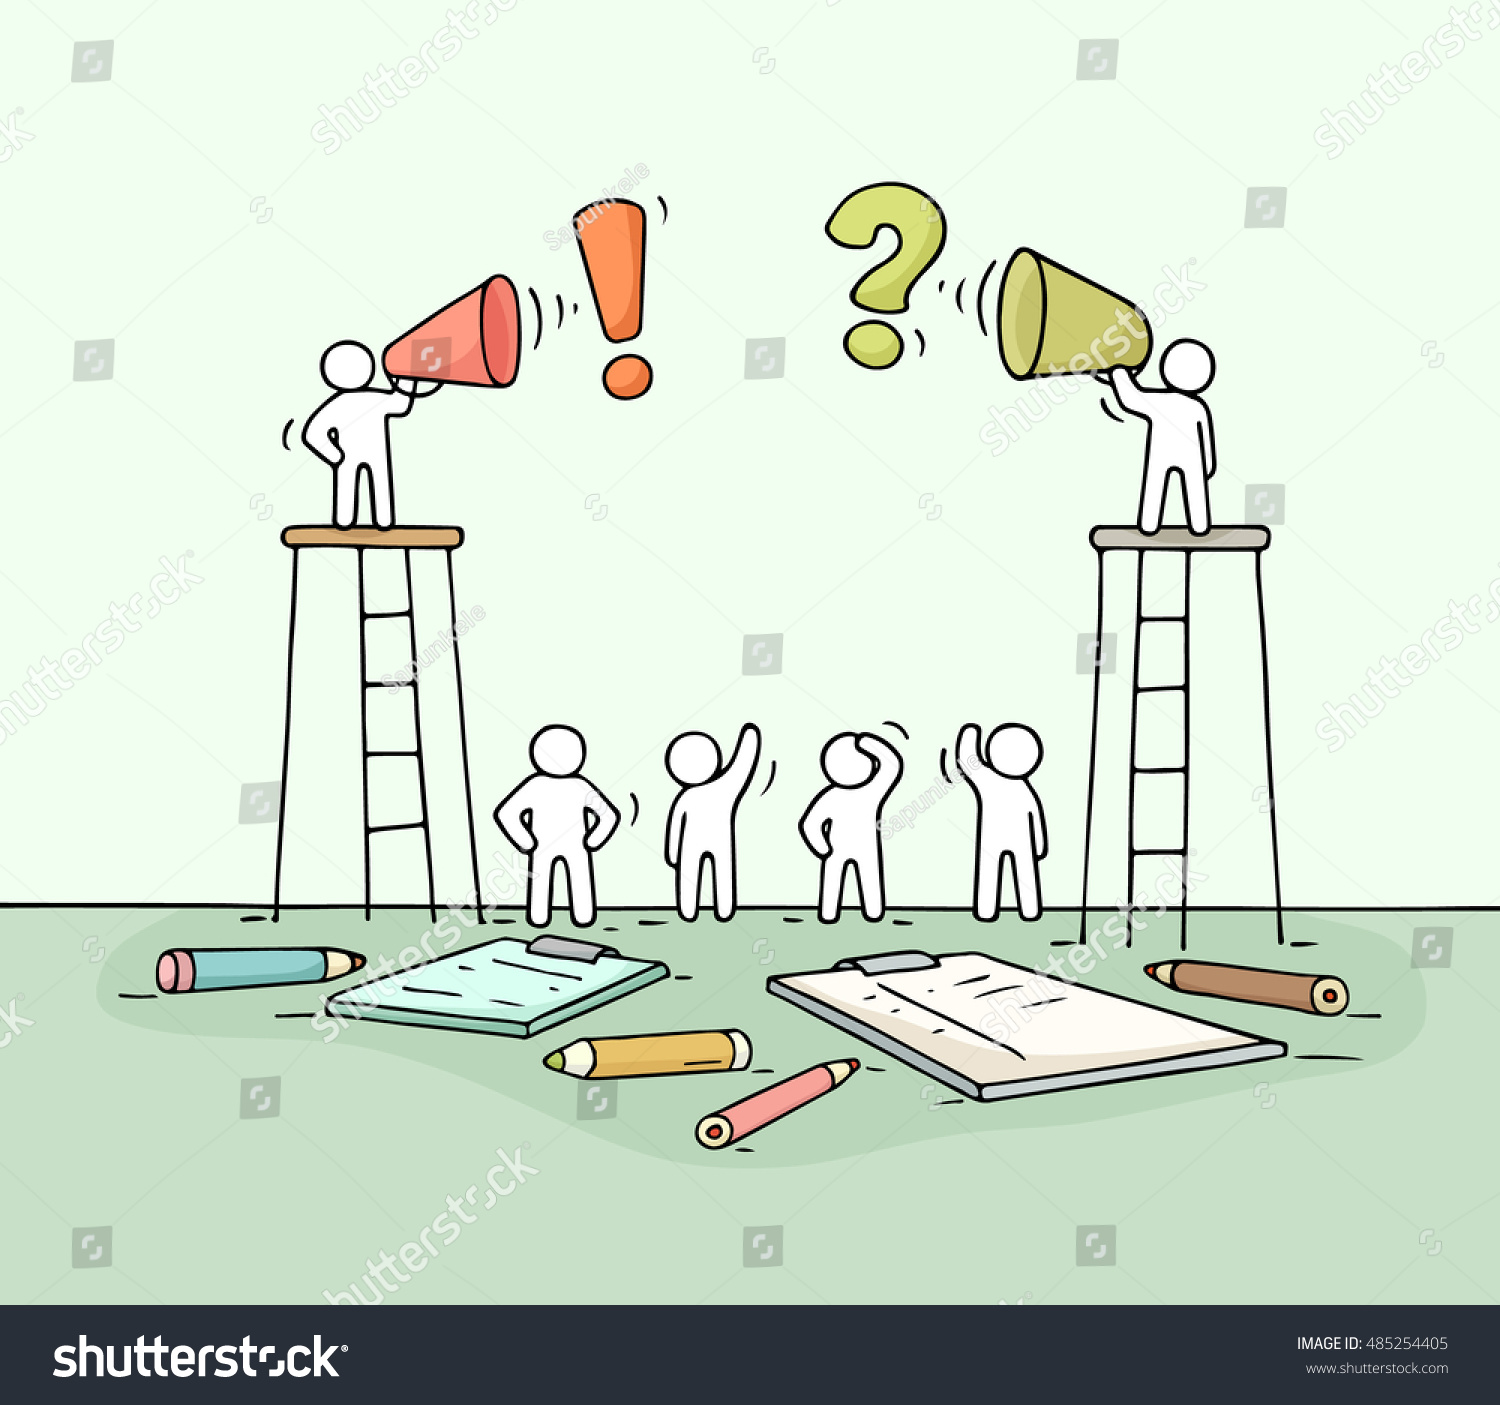 SVG of Sketch of two speakers. Doodle cute miniature scene of workers with loudspeakers. Hand drawn cartoon vector illustration for business design. svg